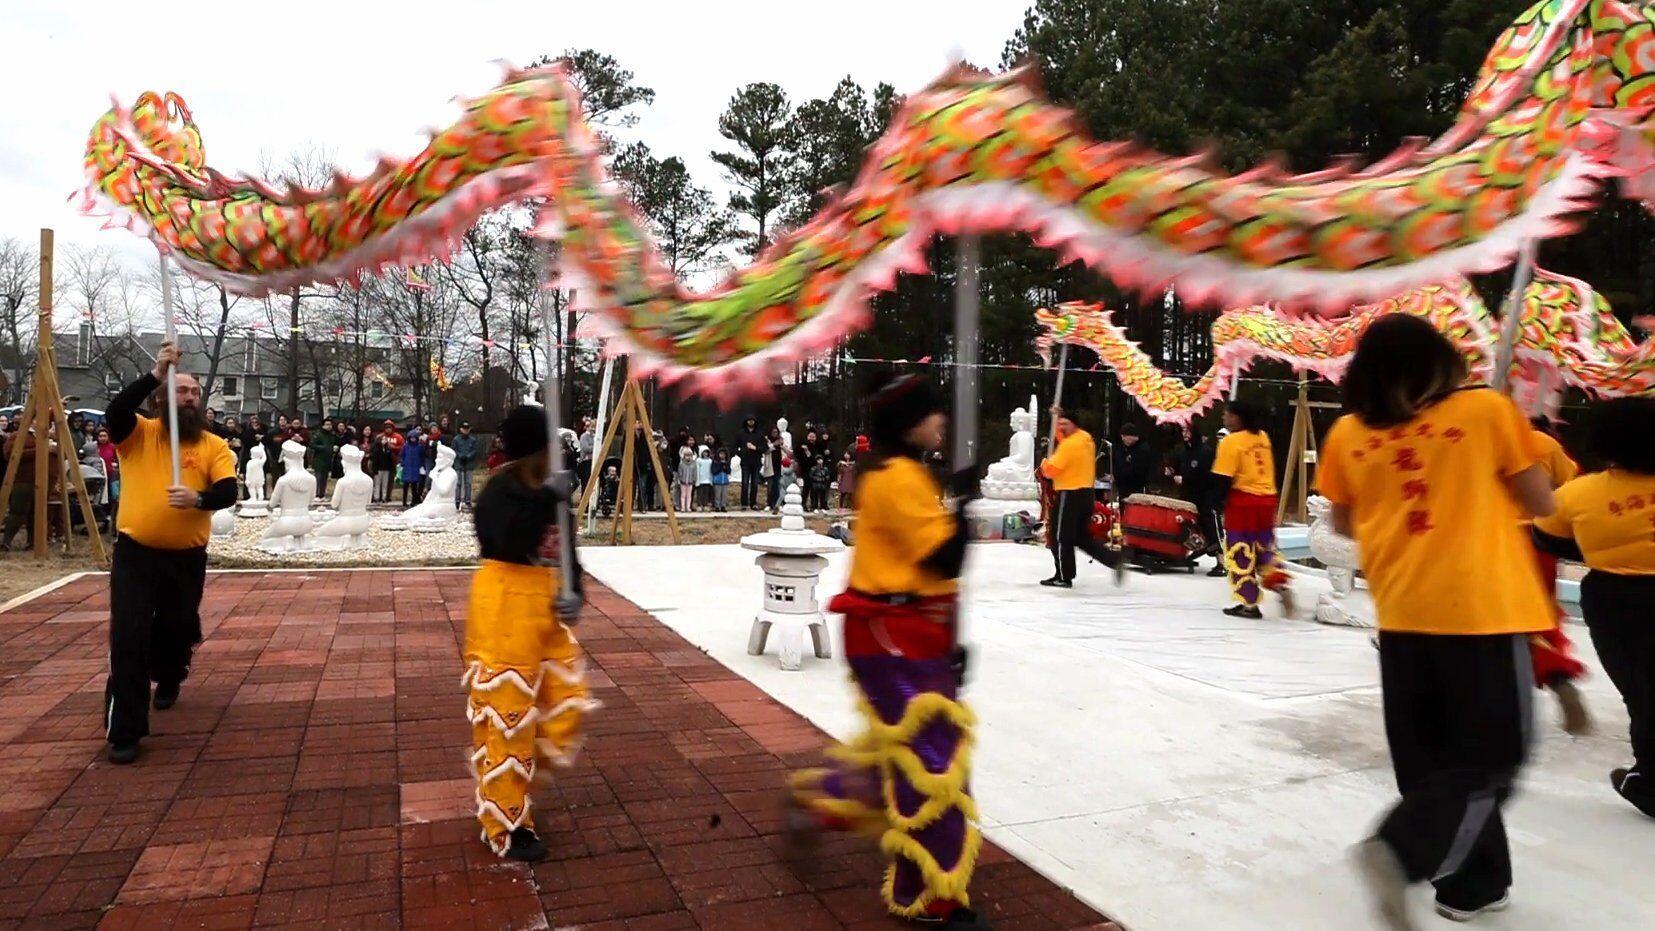 Lucky decorations and symbols for Lunar New Year - Richmond News